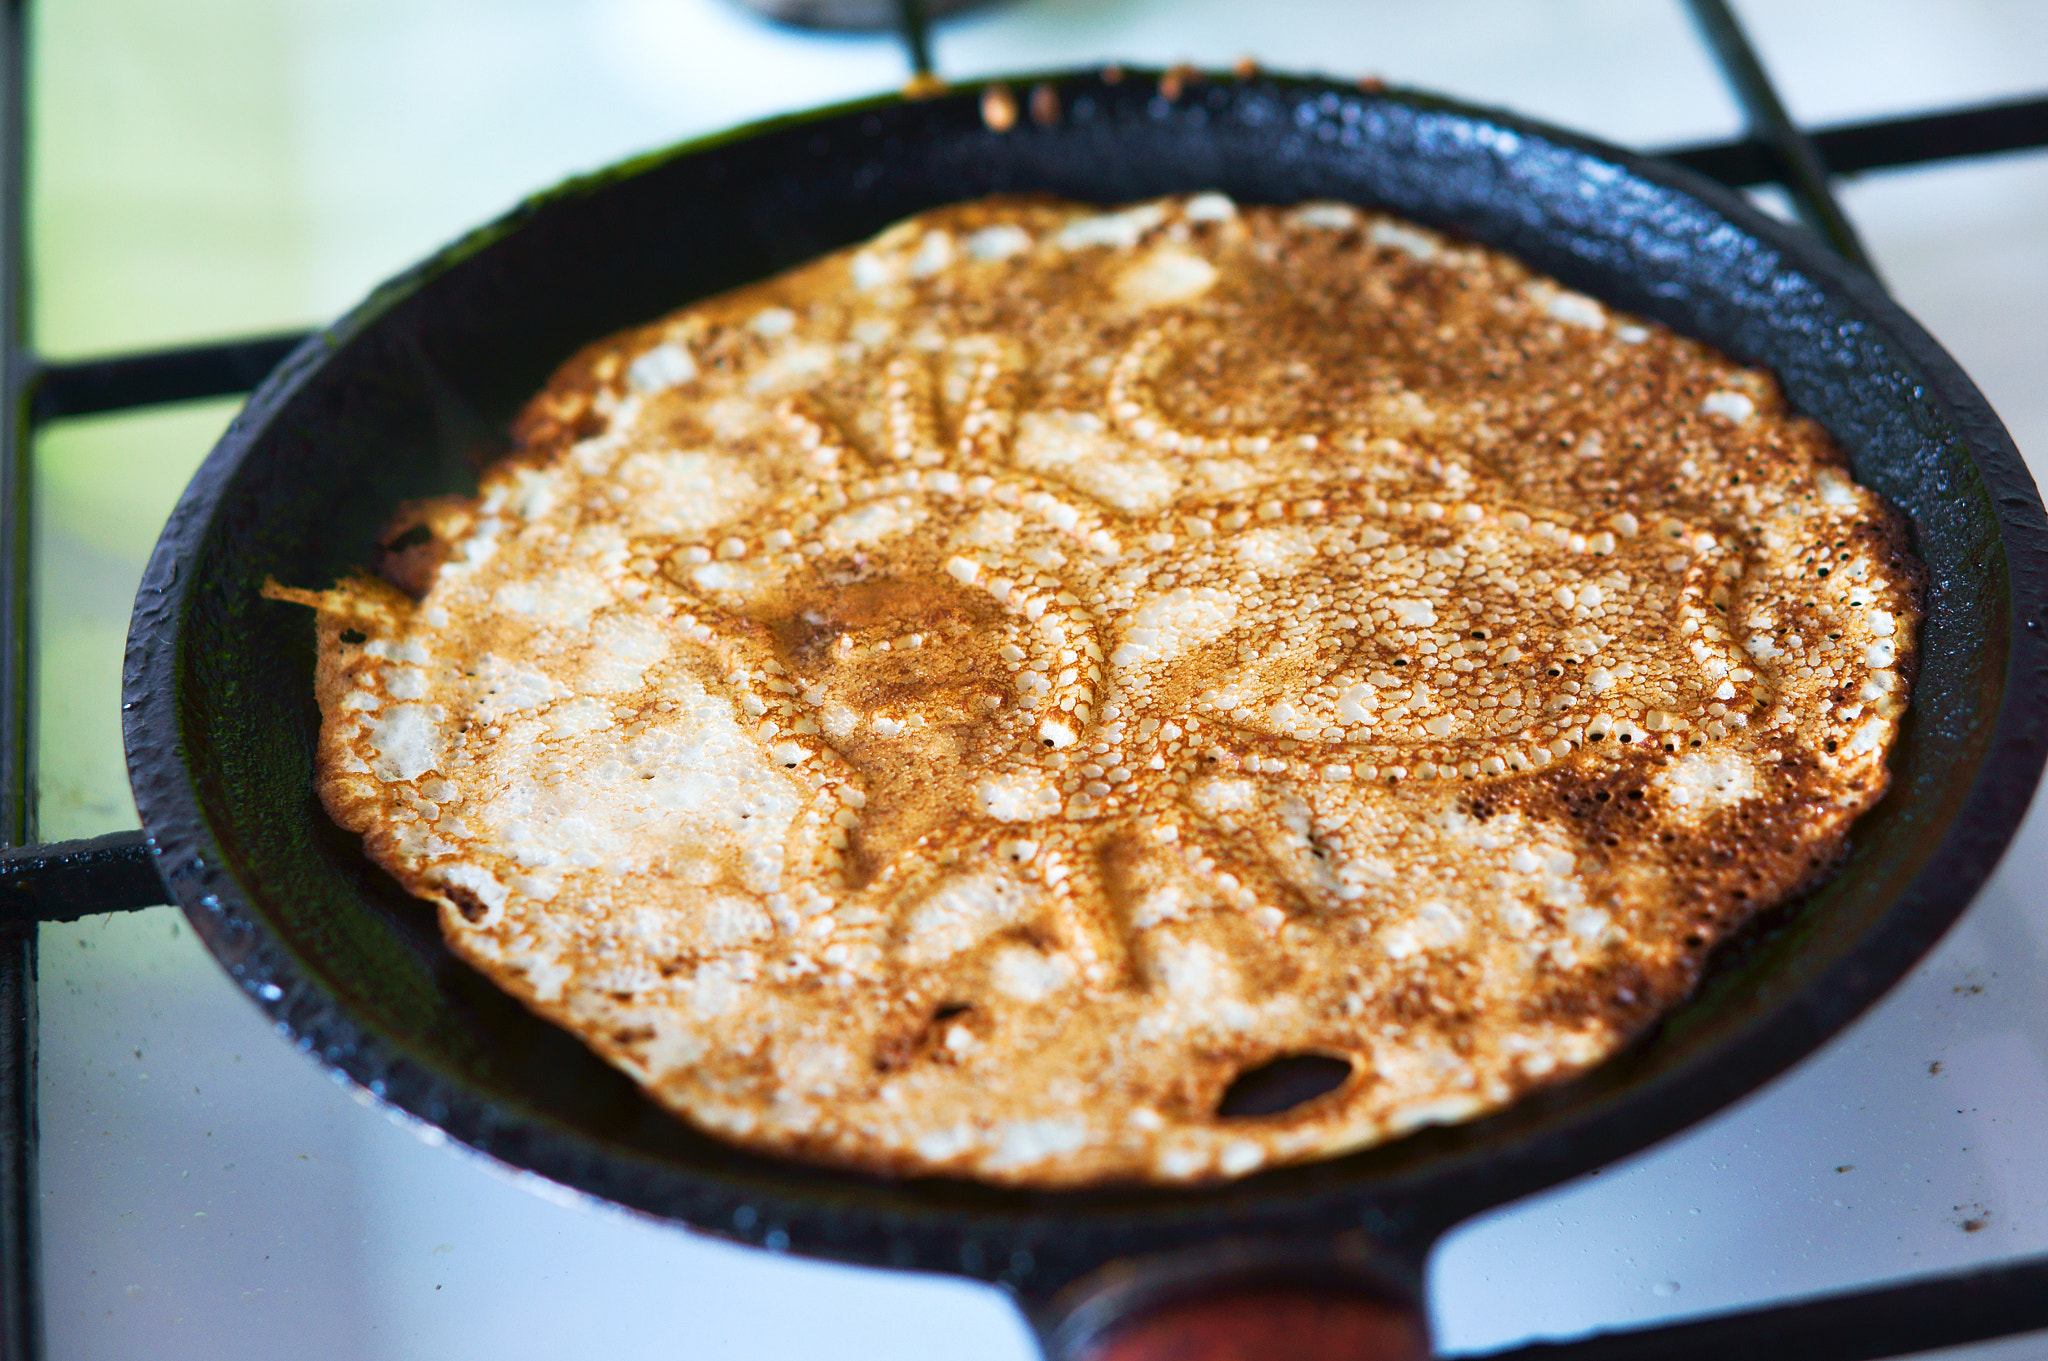 Sony Alpha NEX-3N sample photo. Pancakes, frying pan, oven, gas, carnival, cook, kitchen, cooking photography